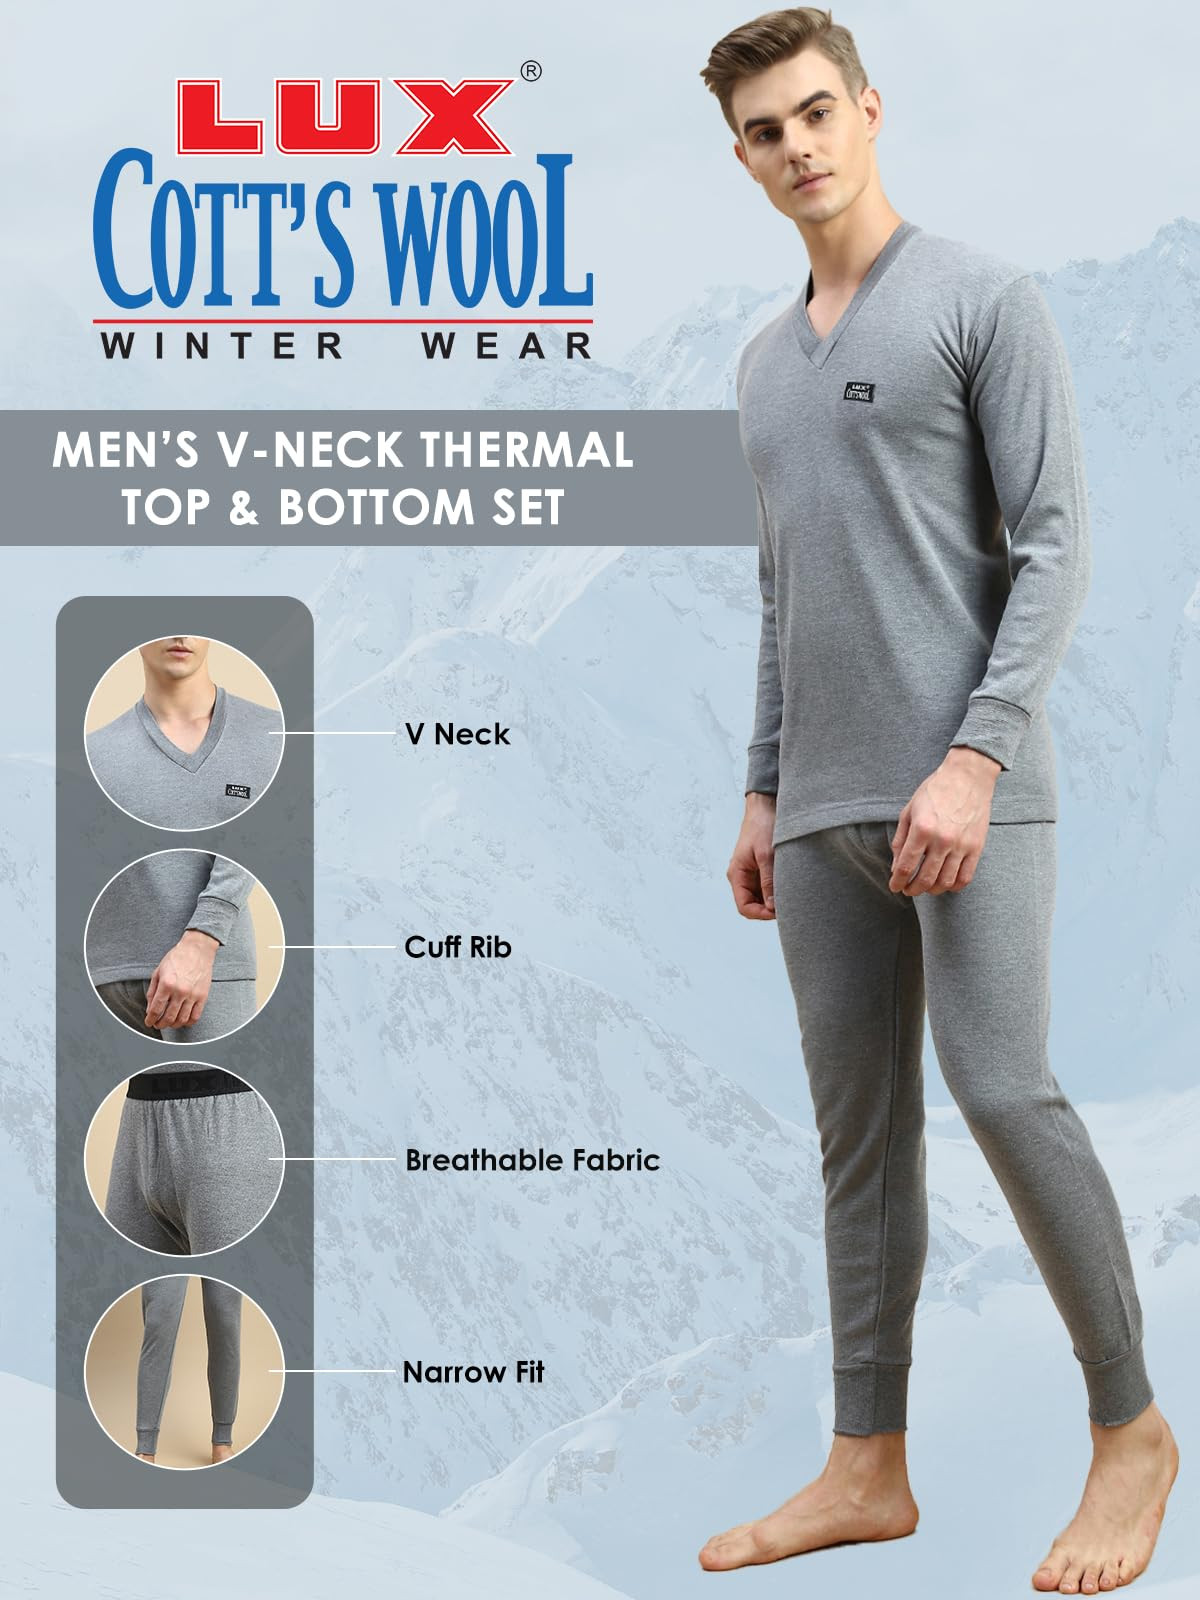 Lux Cottswool Men's Thermal Top and Lower Set - Price History